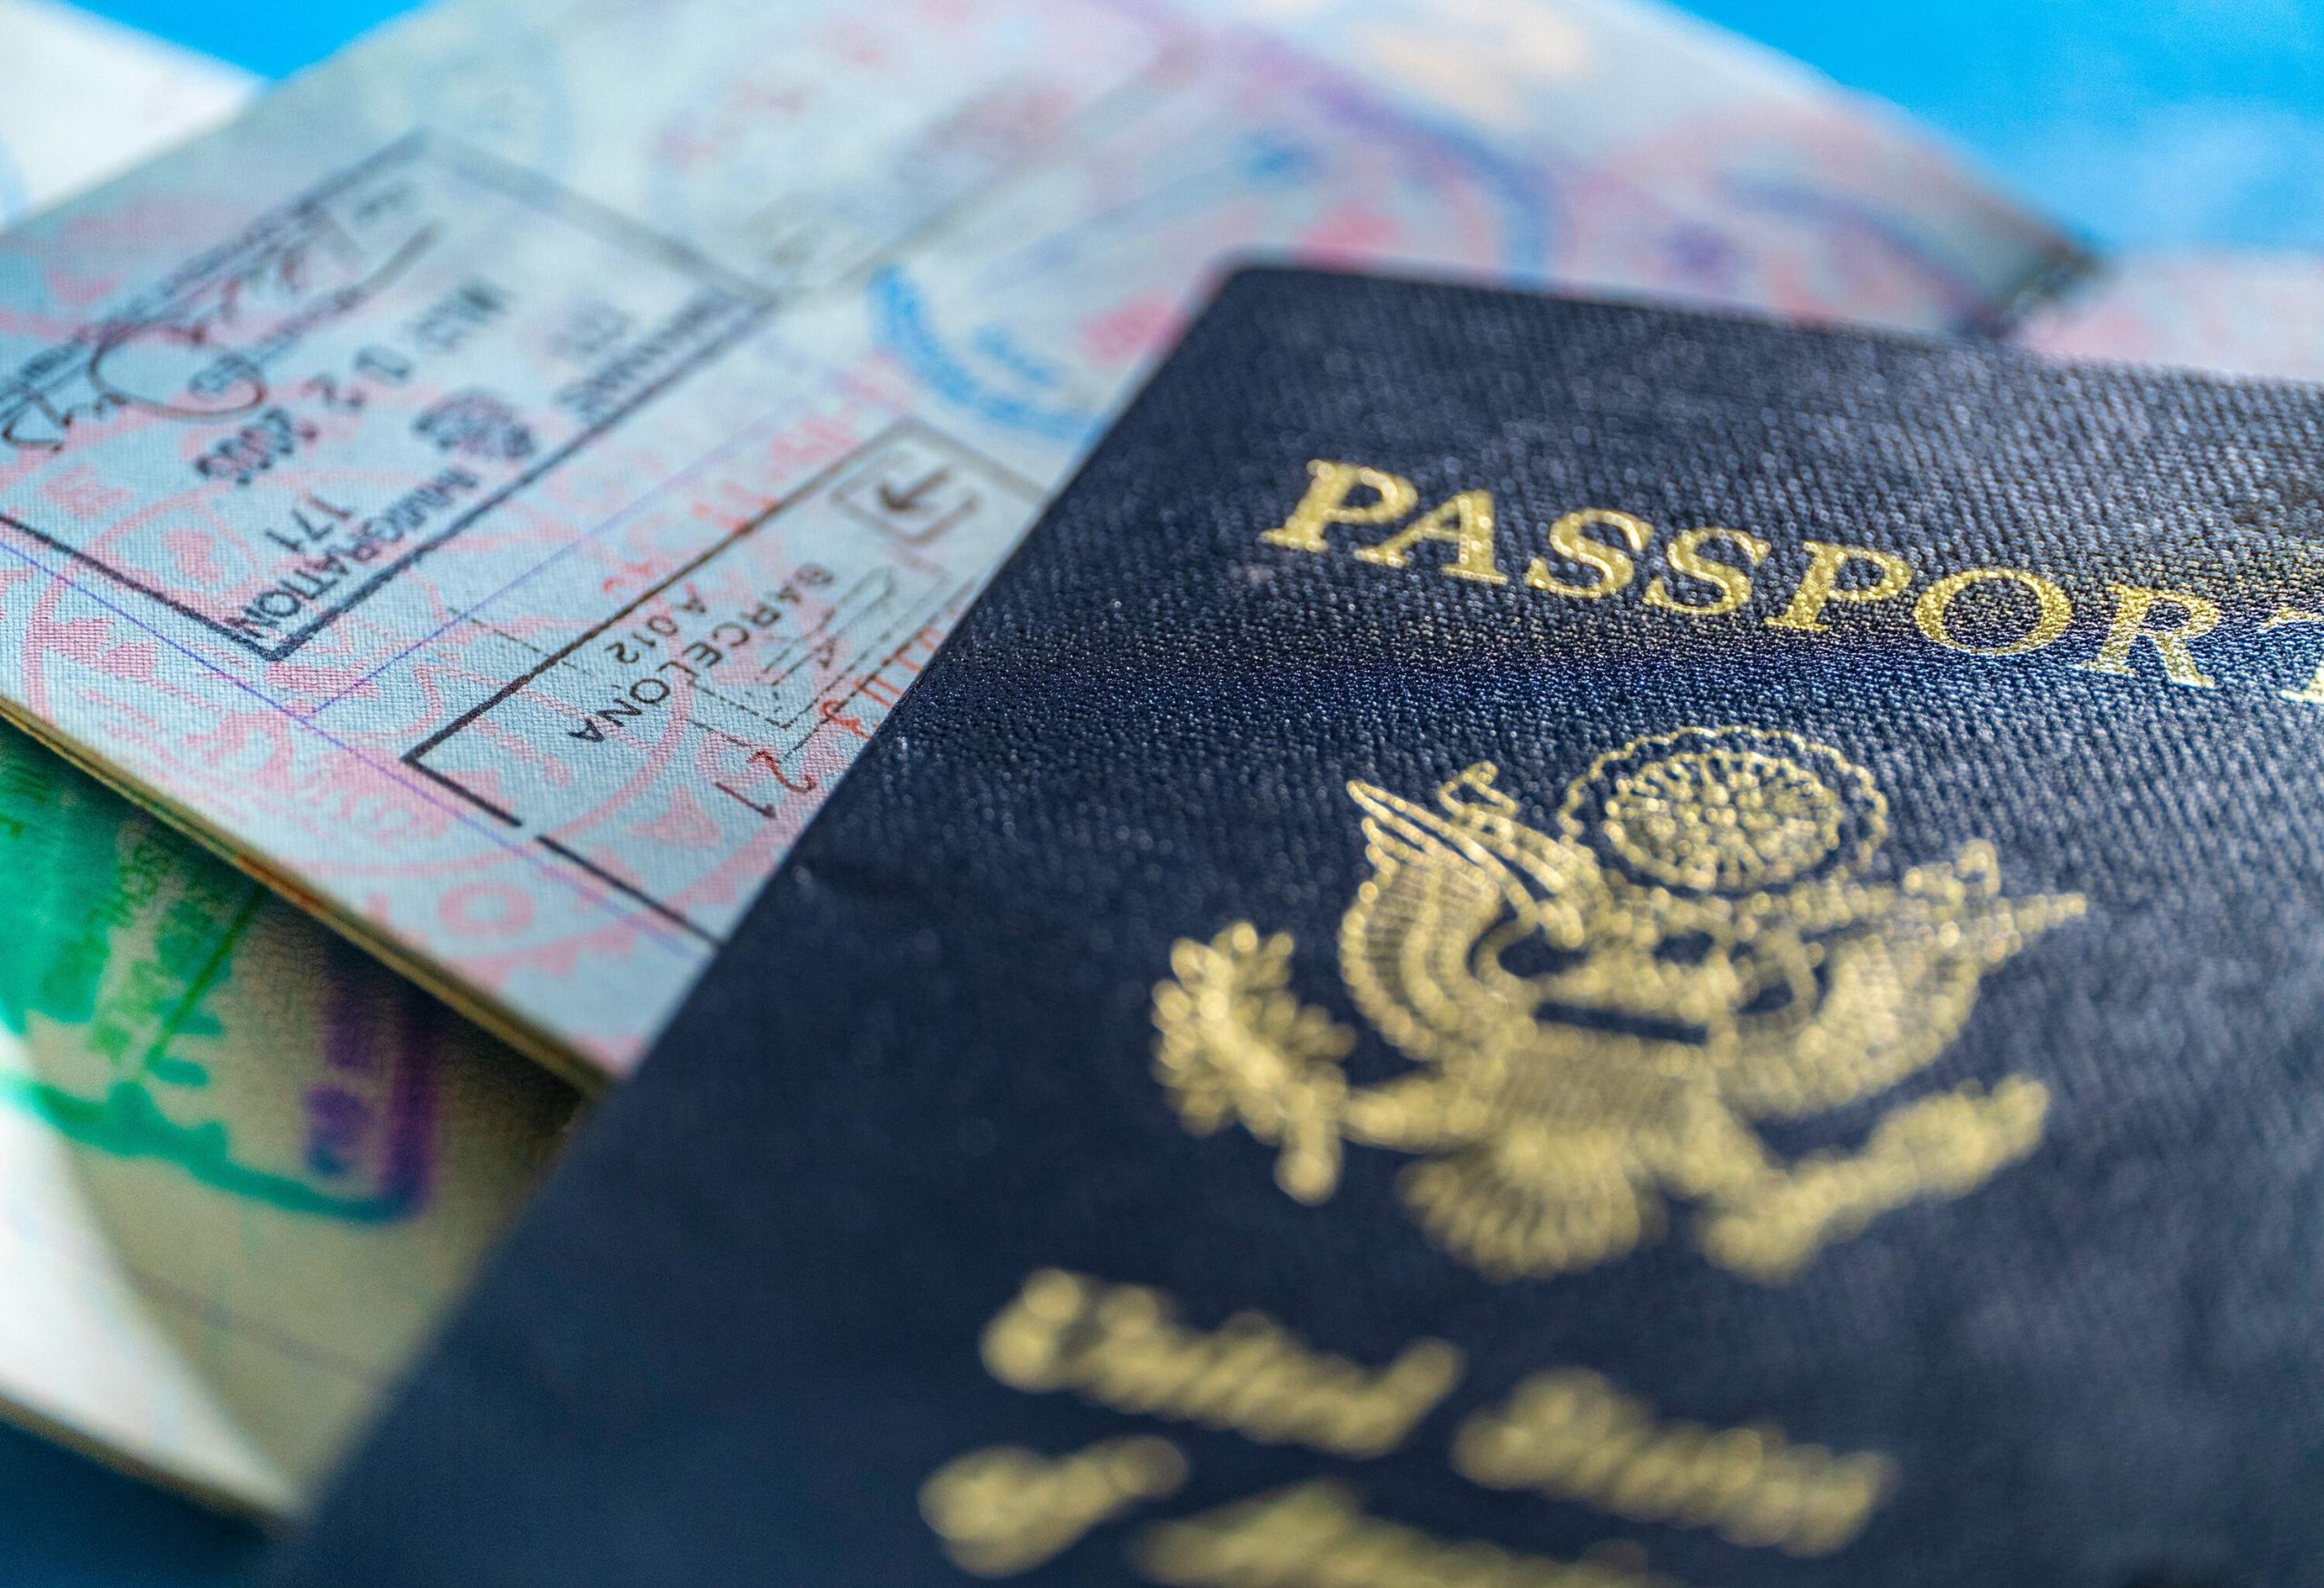 passport can travel without